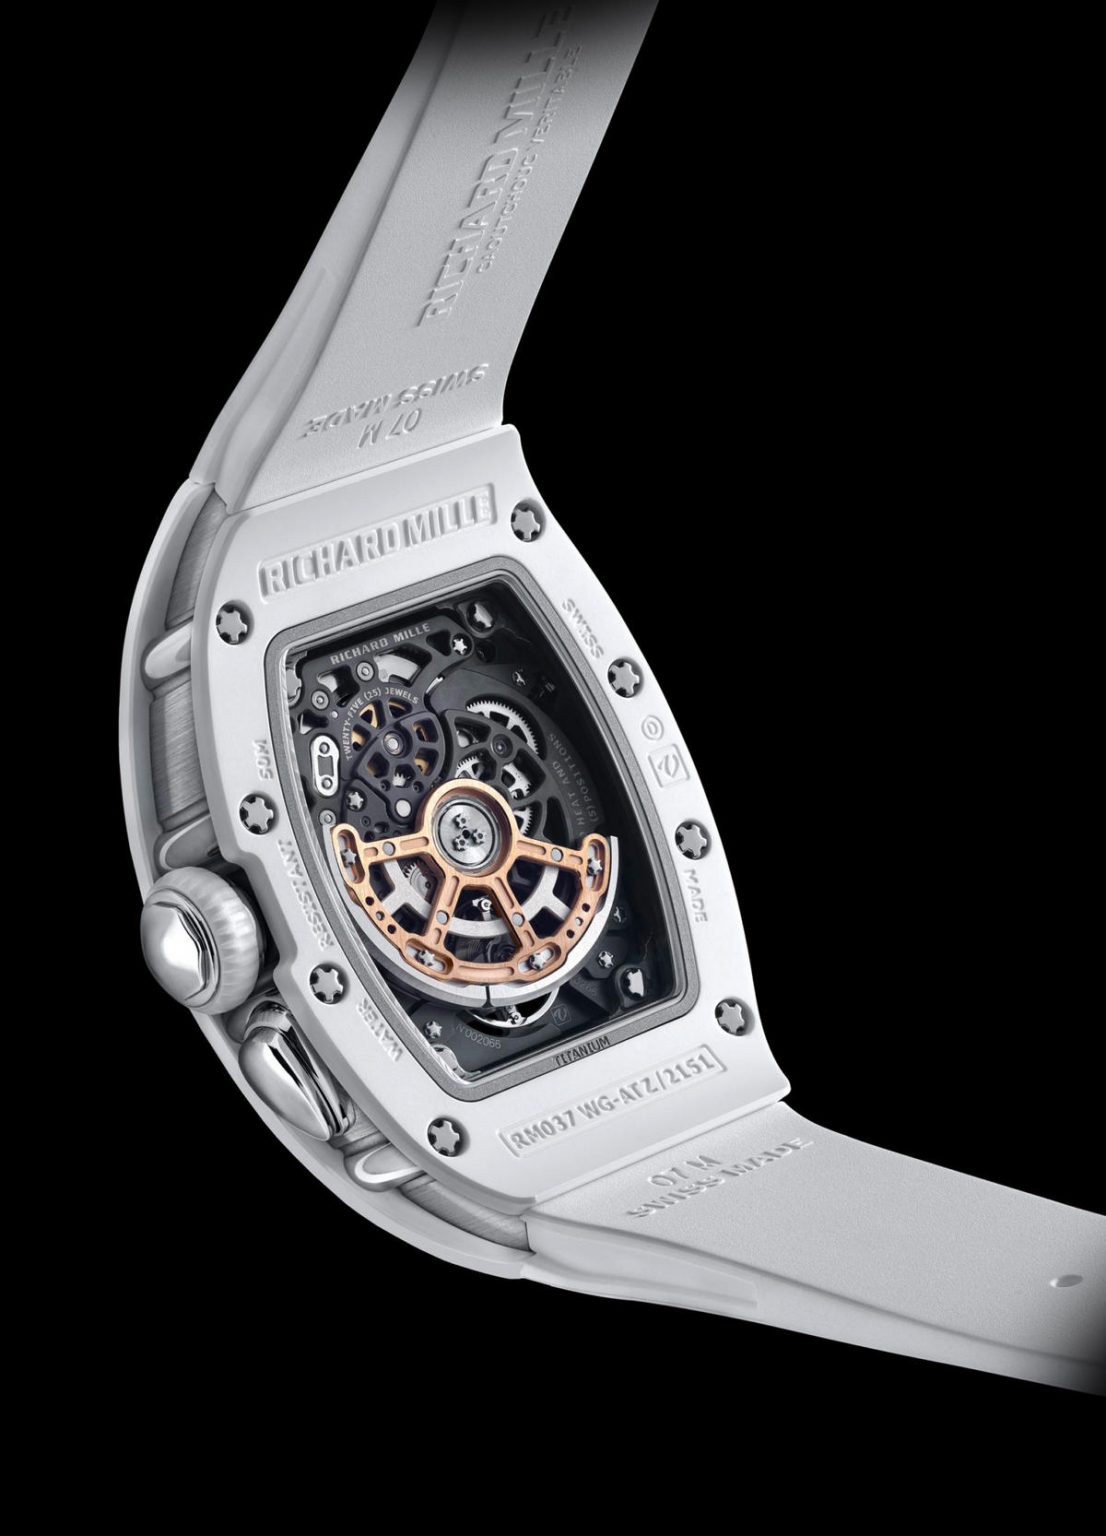 Richard Mille has introduced a $180,000 ladies watch in white ceramic